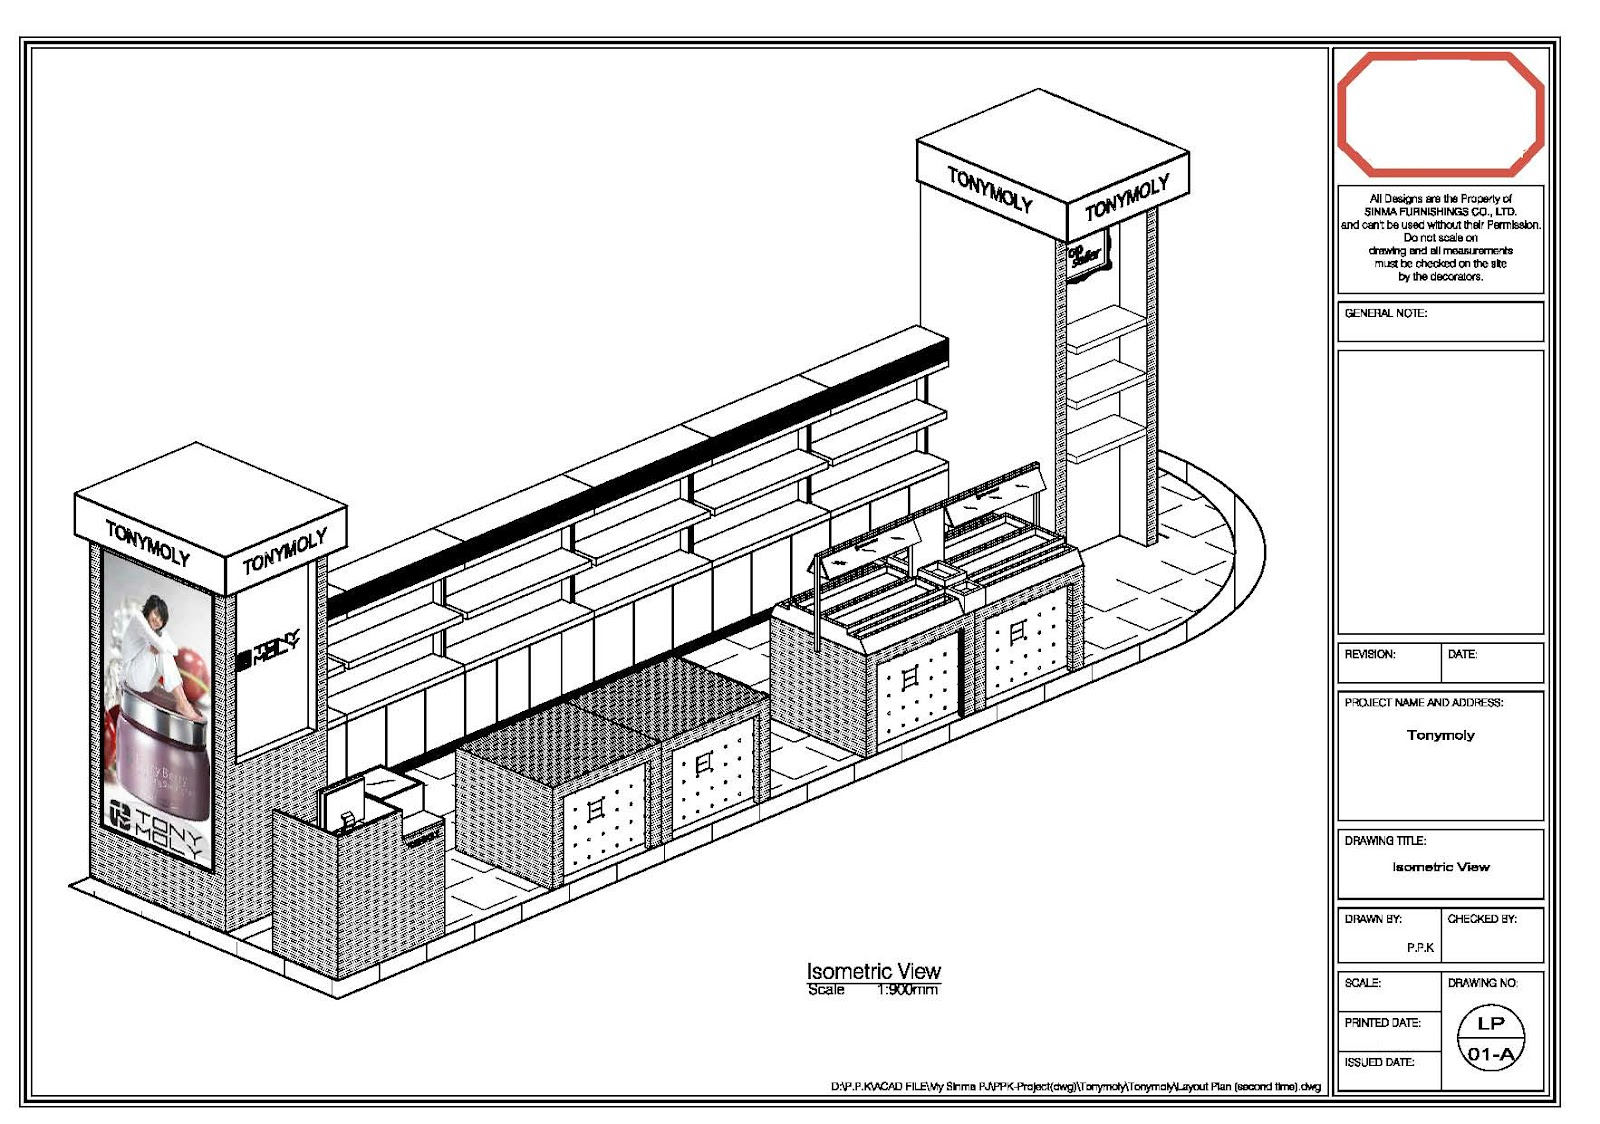 MY CREATION Autocad  Drawing 